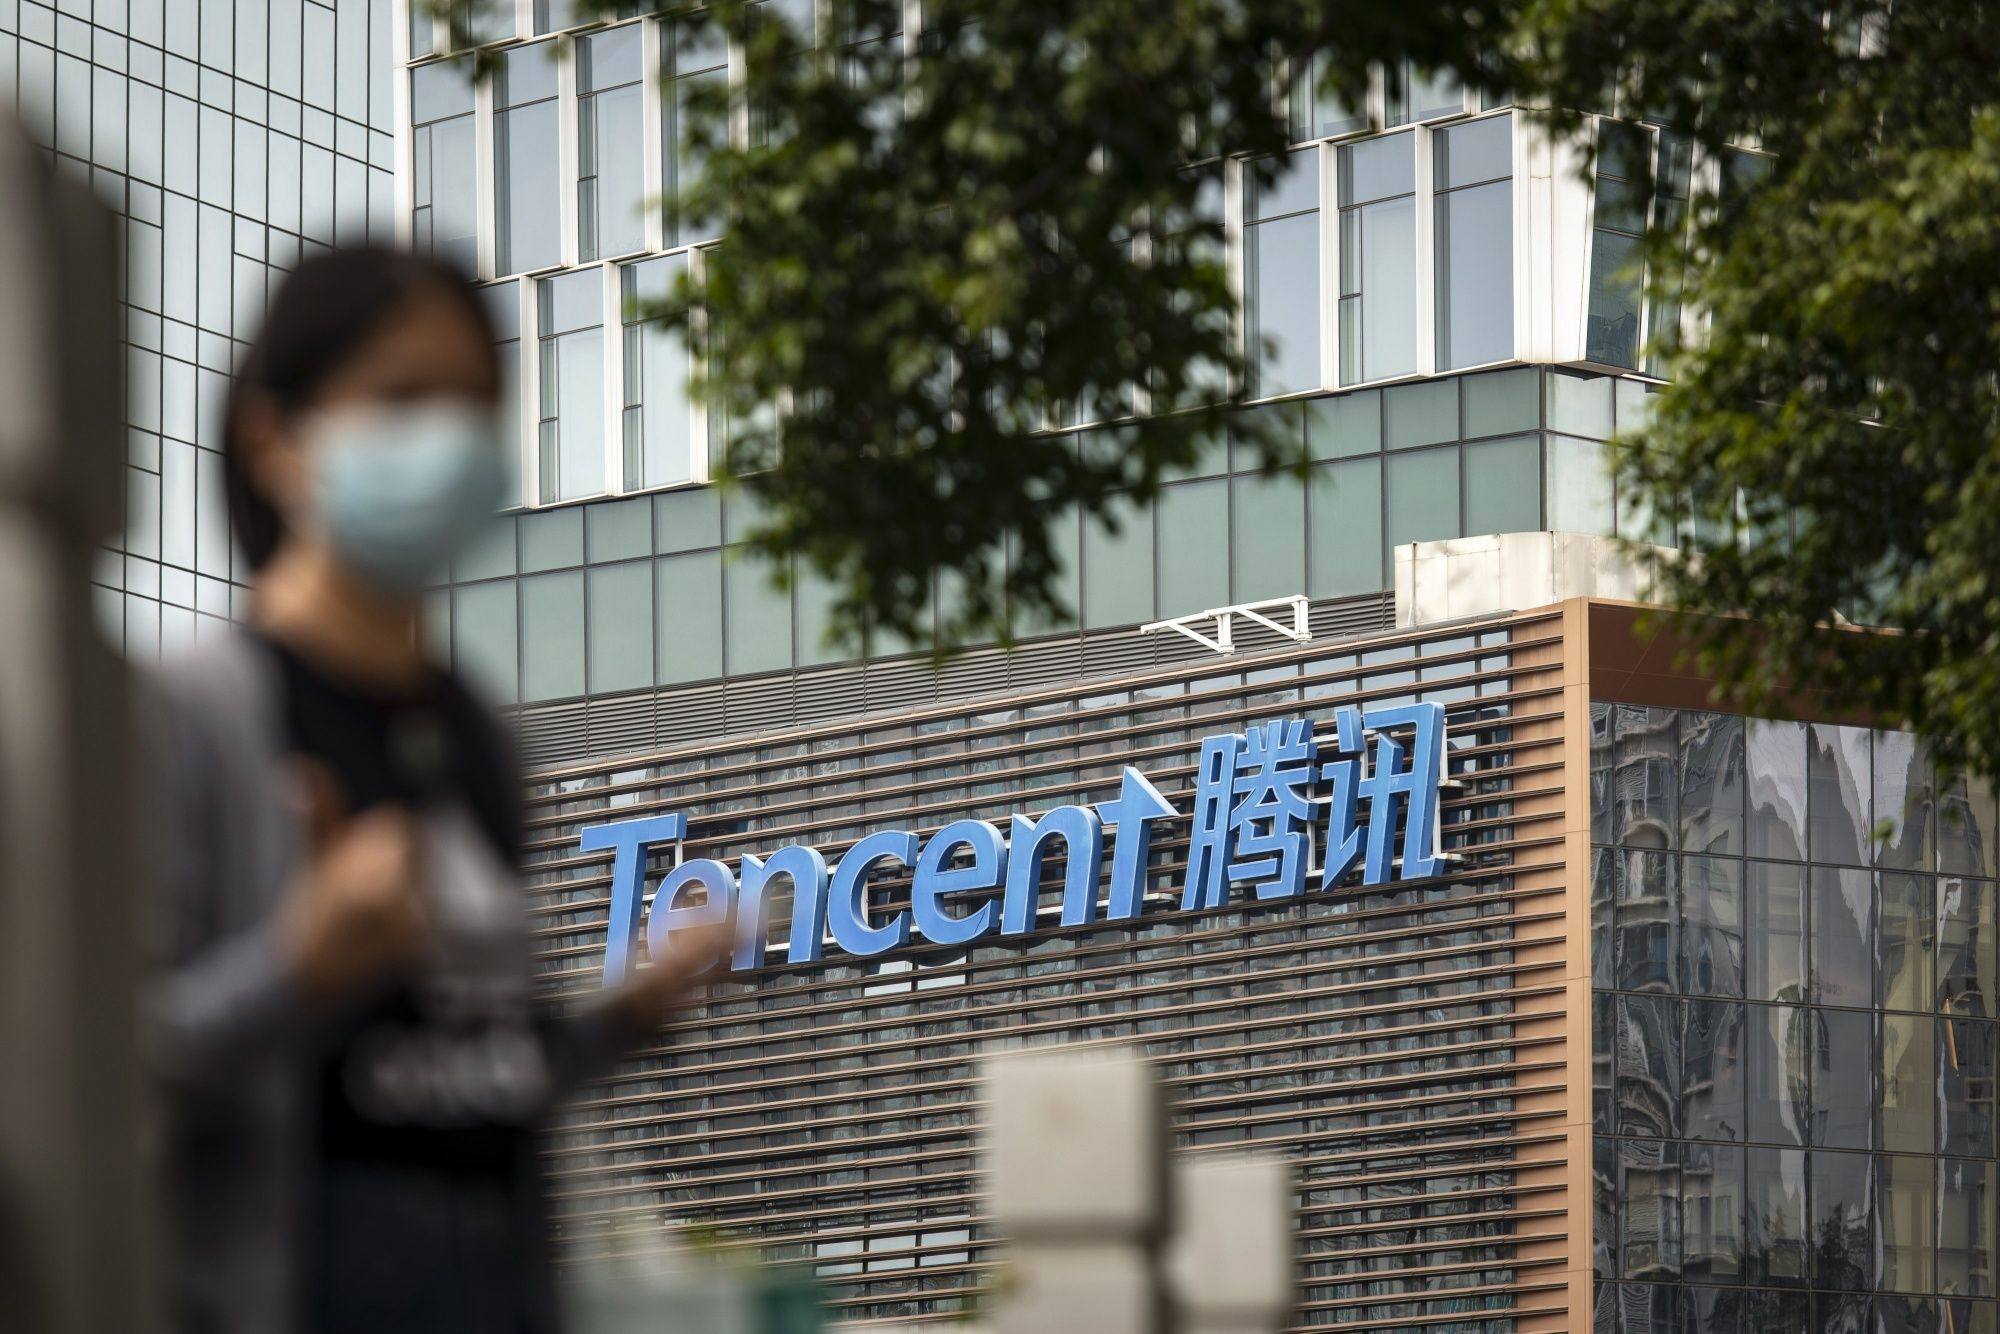 Signage at the Tencent Holdings Ltd. headquarters in Shenzhen, China. Photo: Bloomberg